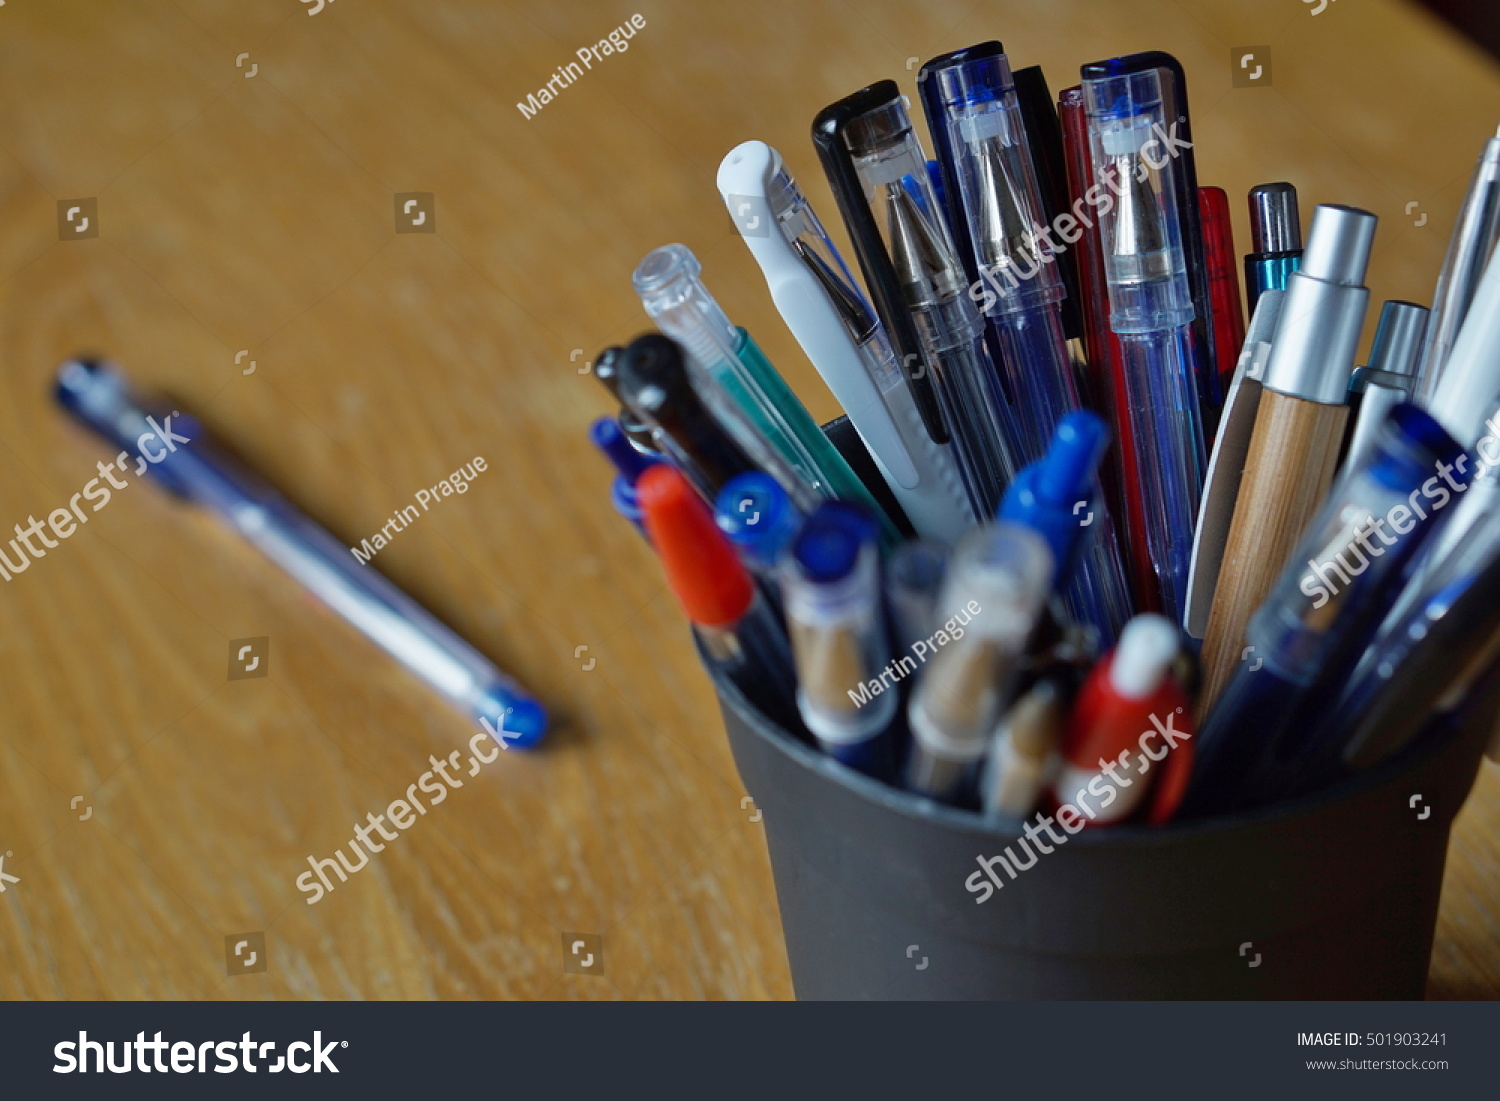 Writing utensils in the business environment with ball pens, highlighters and pens #501903241